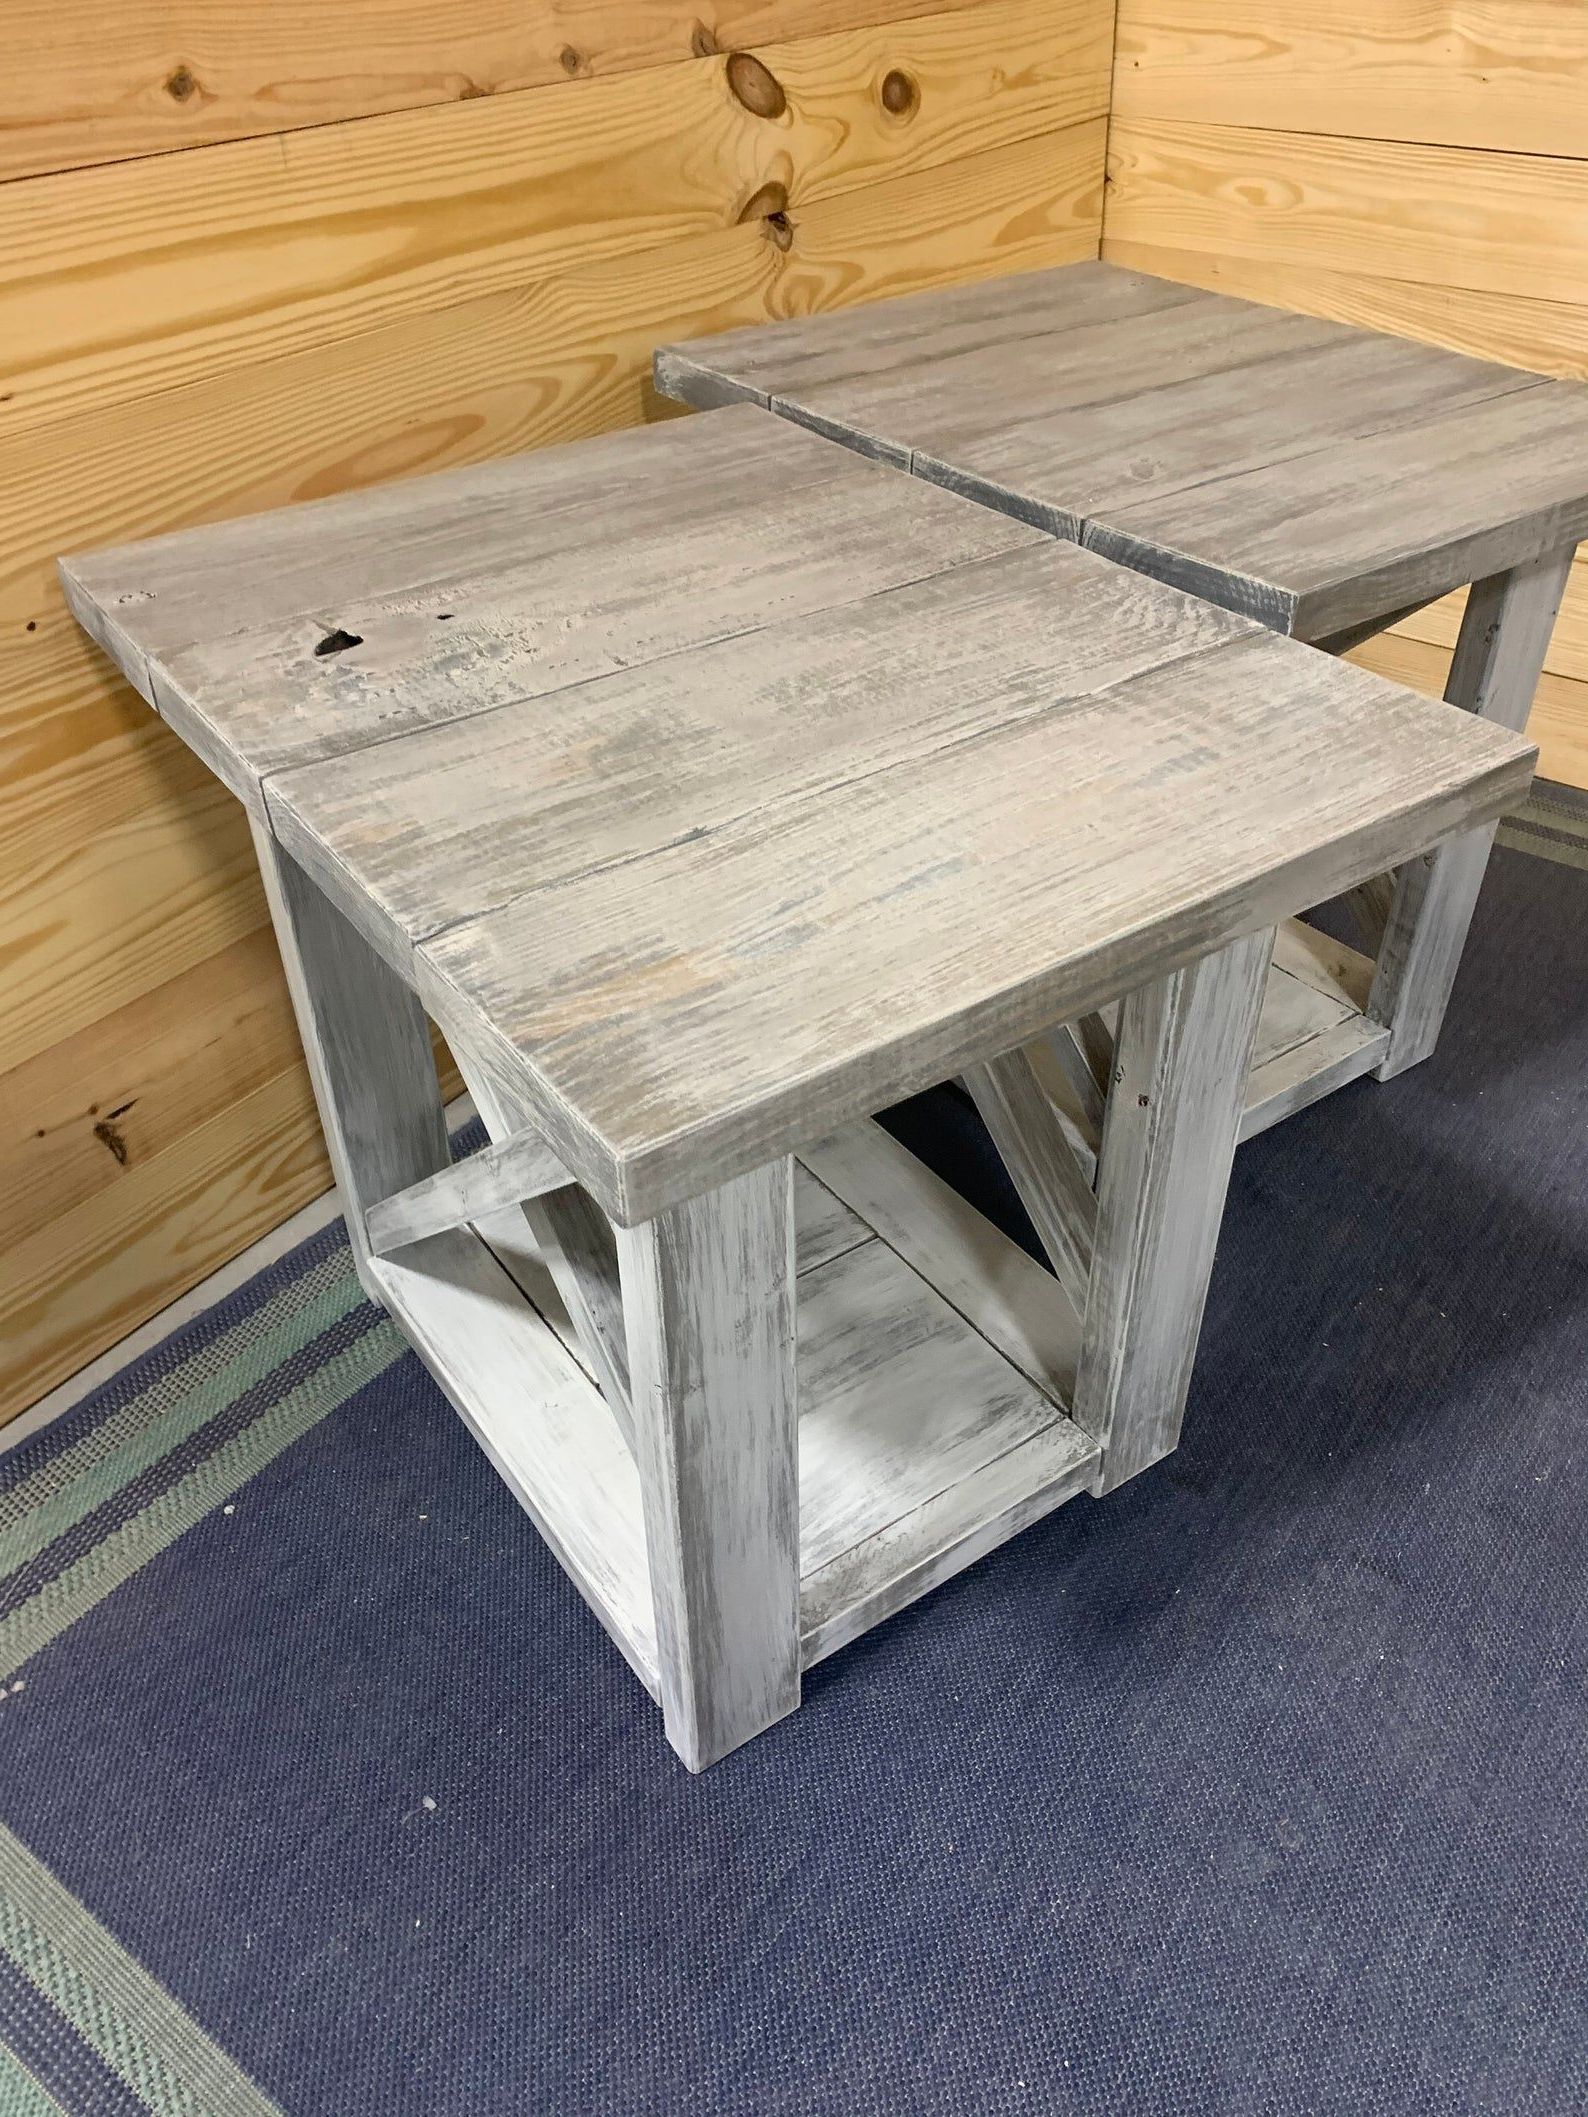 Long Rustic Farmhouse End Tables Gray White Wash Top With Inside Newest Oceanside White Washed Coffee Tables (View 10 of 20)